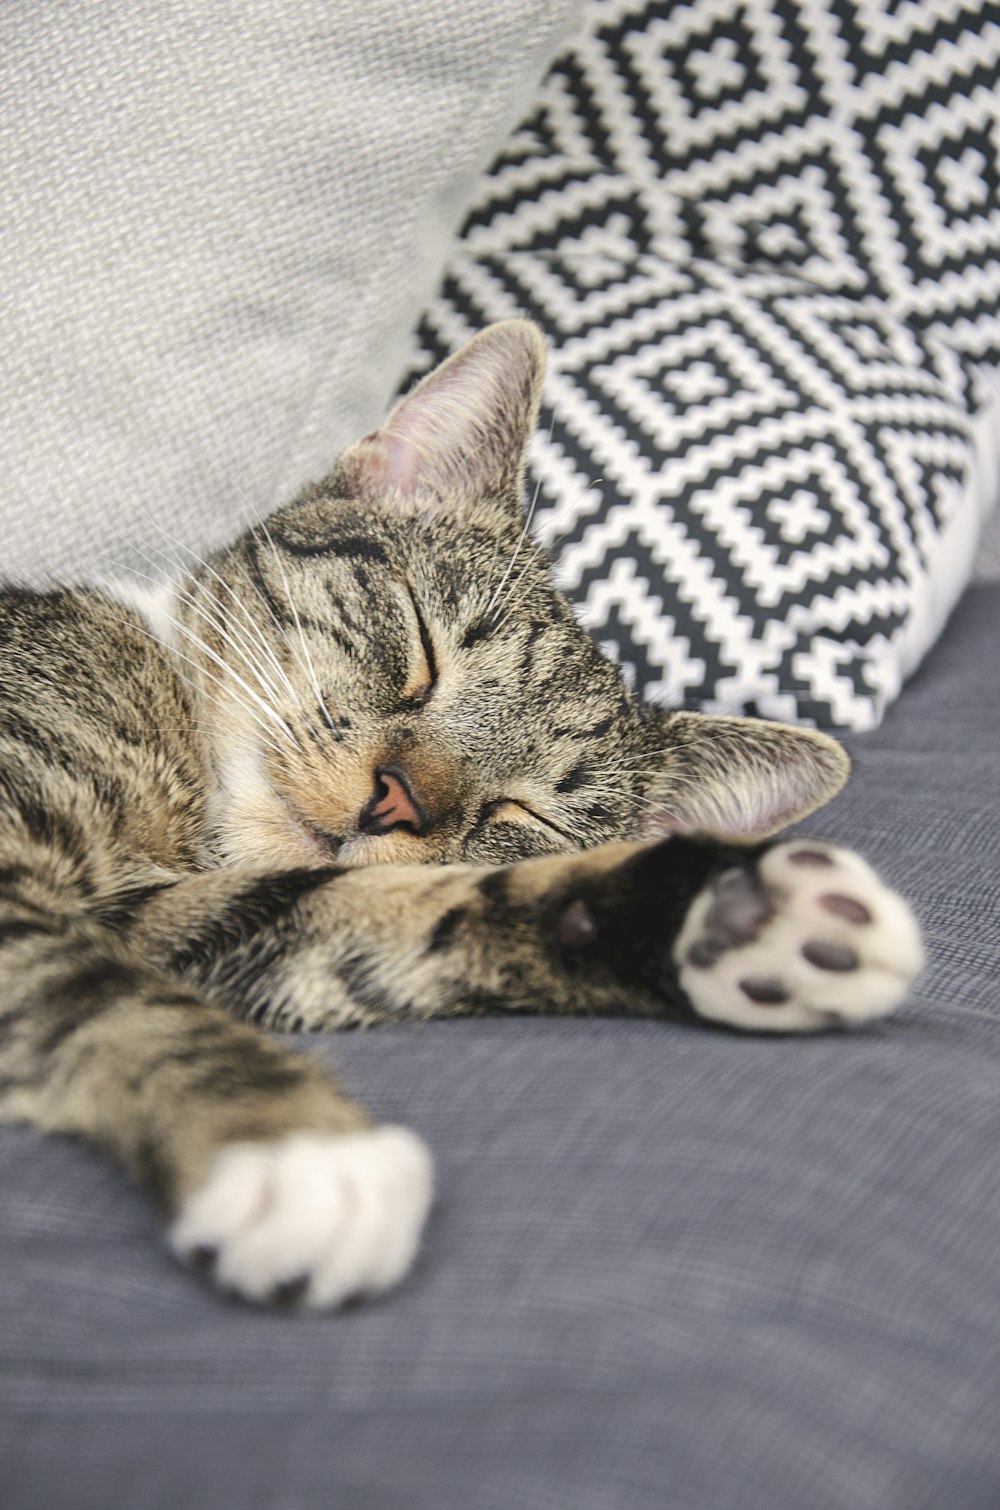 brown tabby cat lying on white and black textile